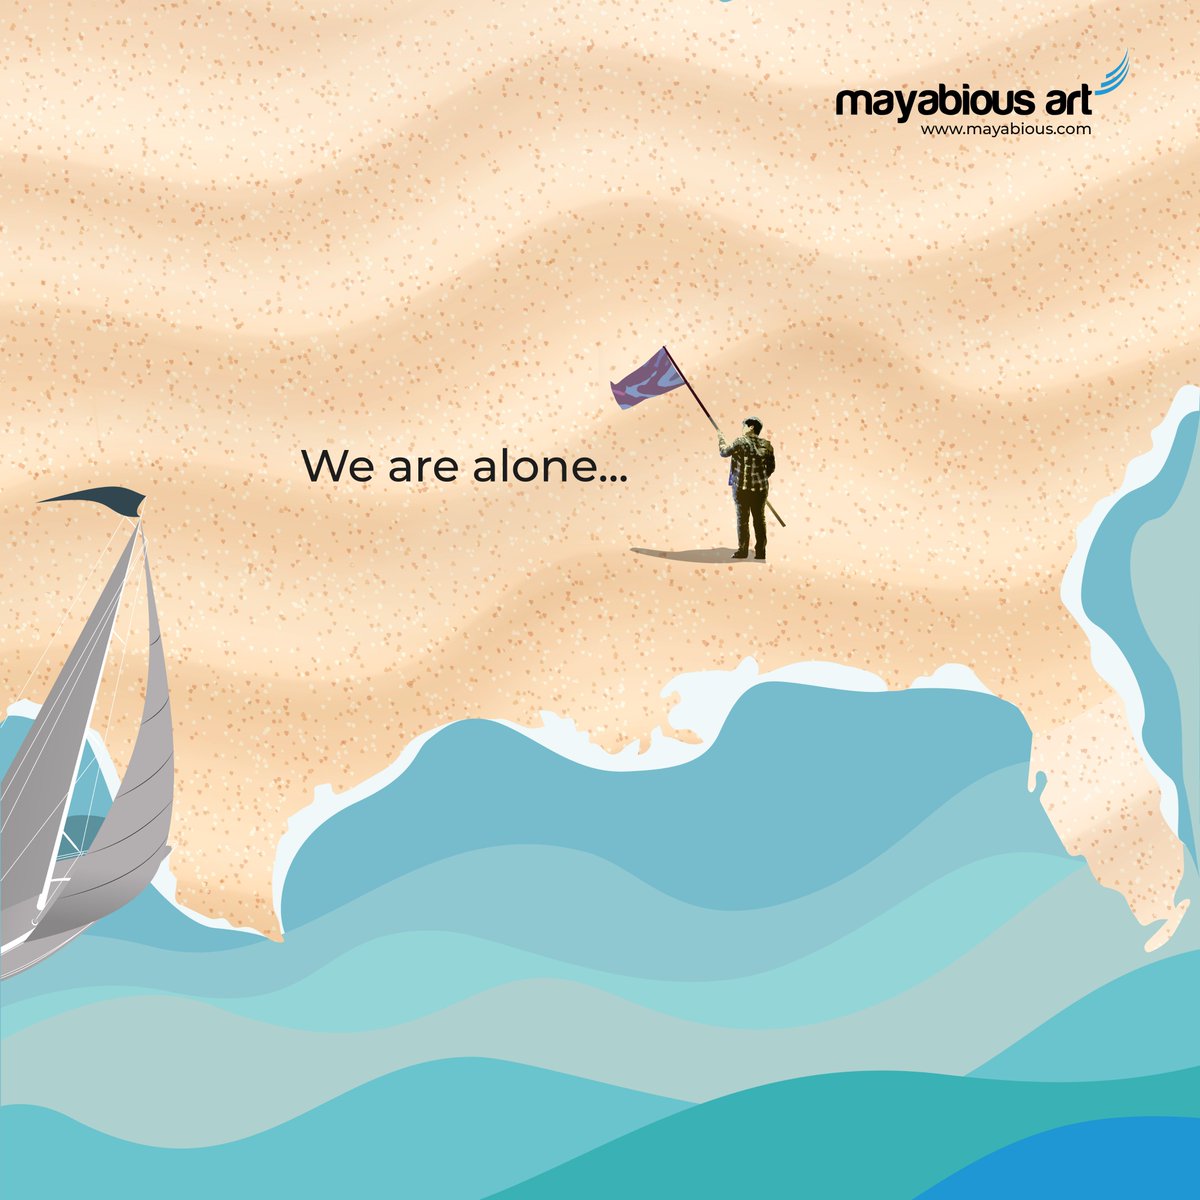 Discovering all alone adds a spark, allowing you to set the mark.

🌐- mayabious.com

#3D #3dvisualization #3dwalkthrough #brochuredesigning #scalemodel #AugmentedReality #VR #creativeagency #AdvertisementAgency #WeAreAlone #mayabiousgroup